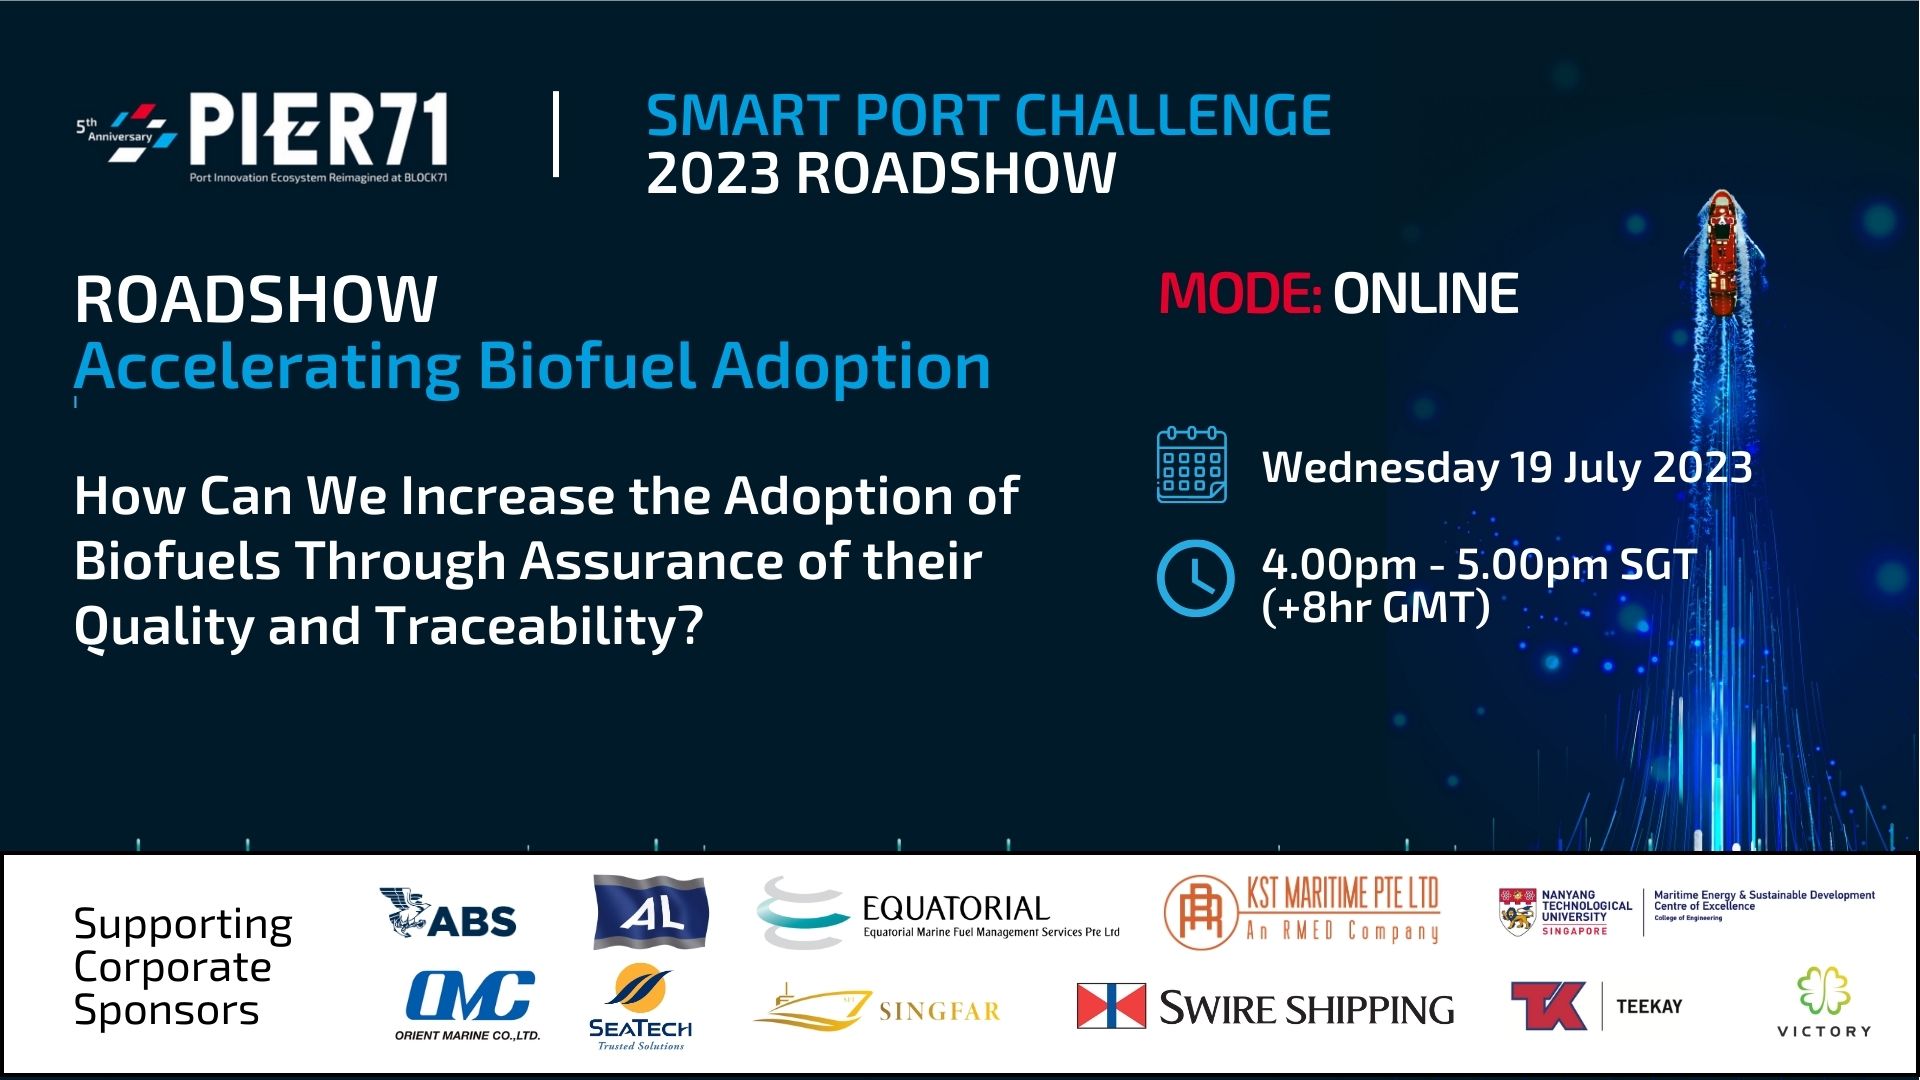 SPC2023 Online Roadshow: Accelerating Biofuel Adoption – through Assurance of Quality and Traceability?